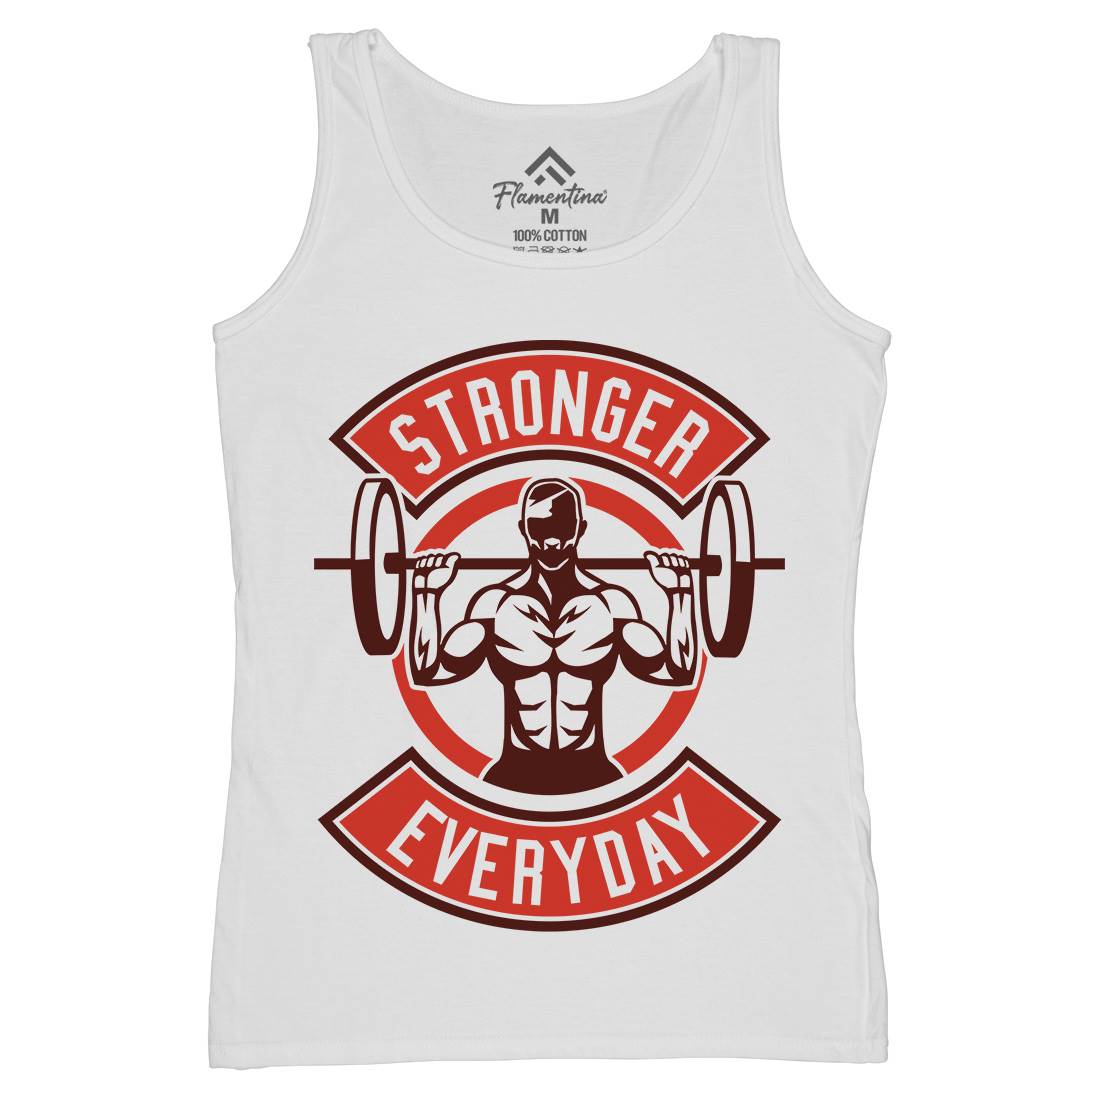 Stronger Everyday Womens Organic Tank Top Vest Gym A289